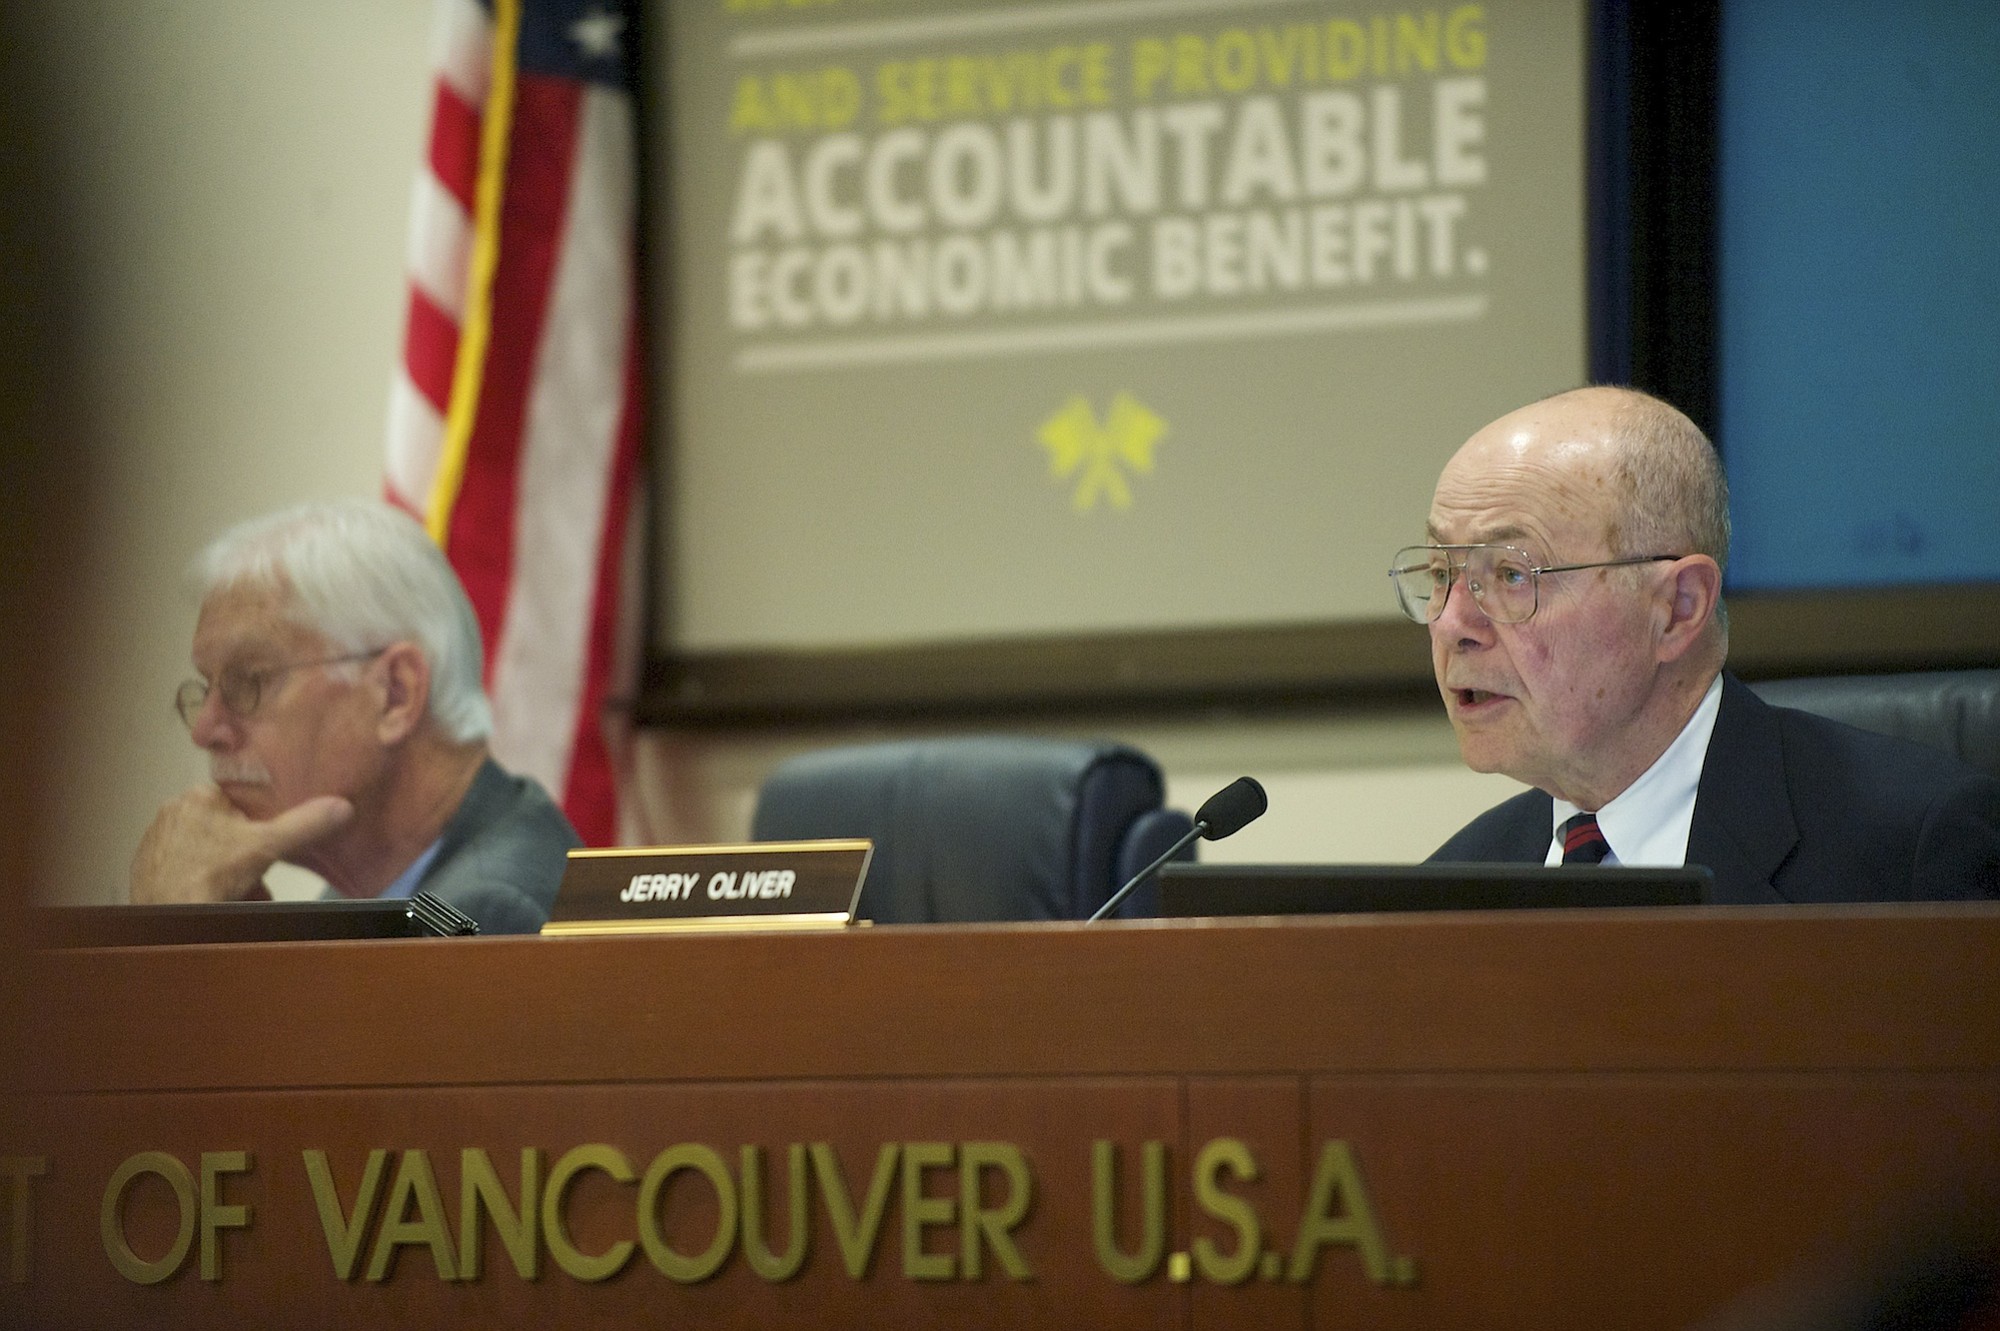 A Vancouver resident has filed two petitions with the Clark County elections office seeking to recall from office Port of Vancouver commissioners Jerry Oliver, right, and Brian Wolfe.